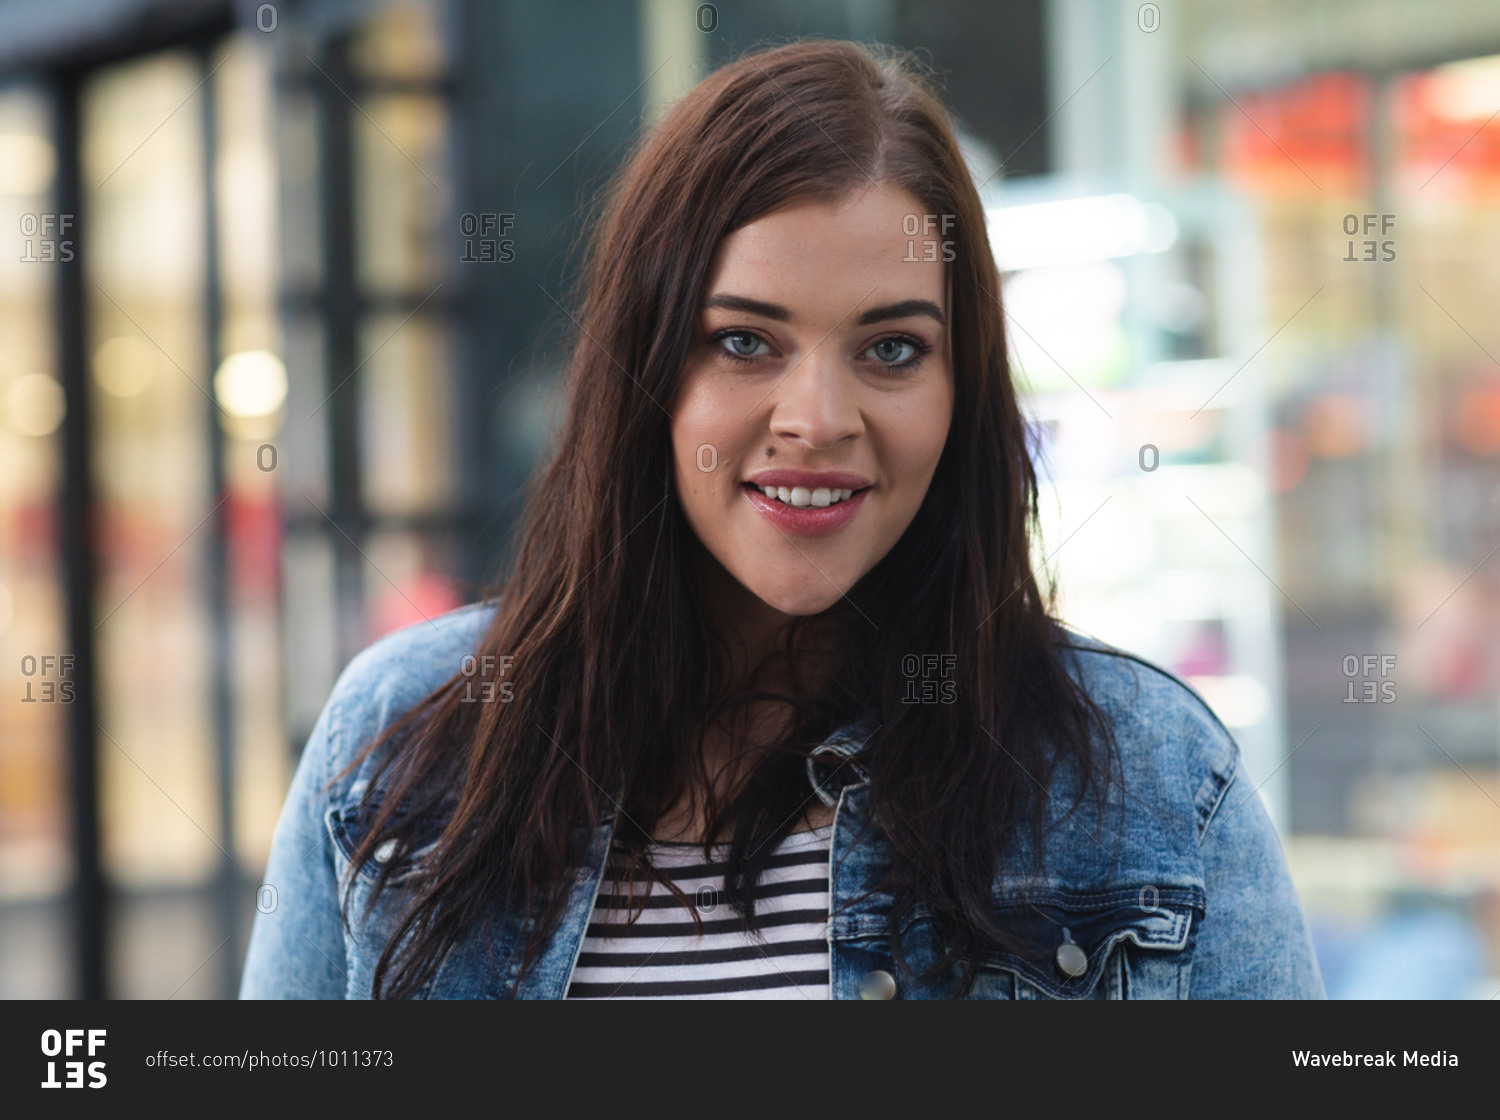 Portrait of a curvy Caucasian woman out and about in the city streets during the day, looking to camera and smiling with modern building in the background